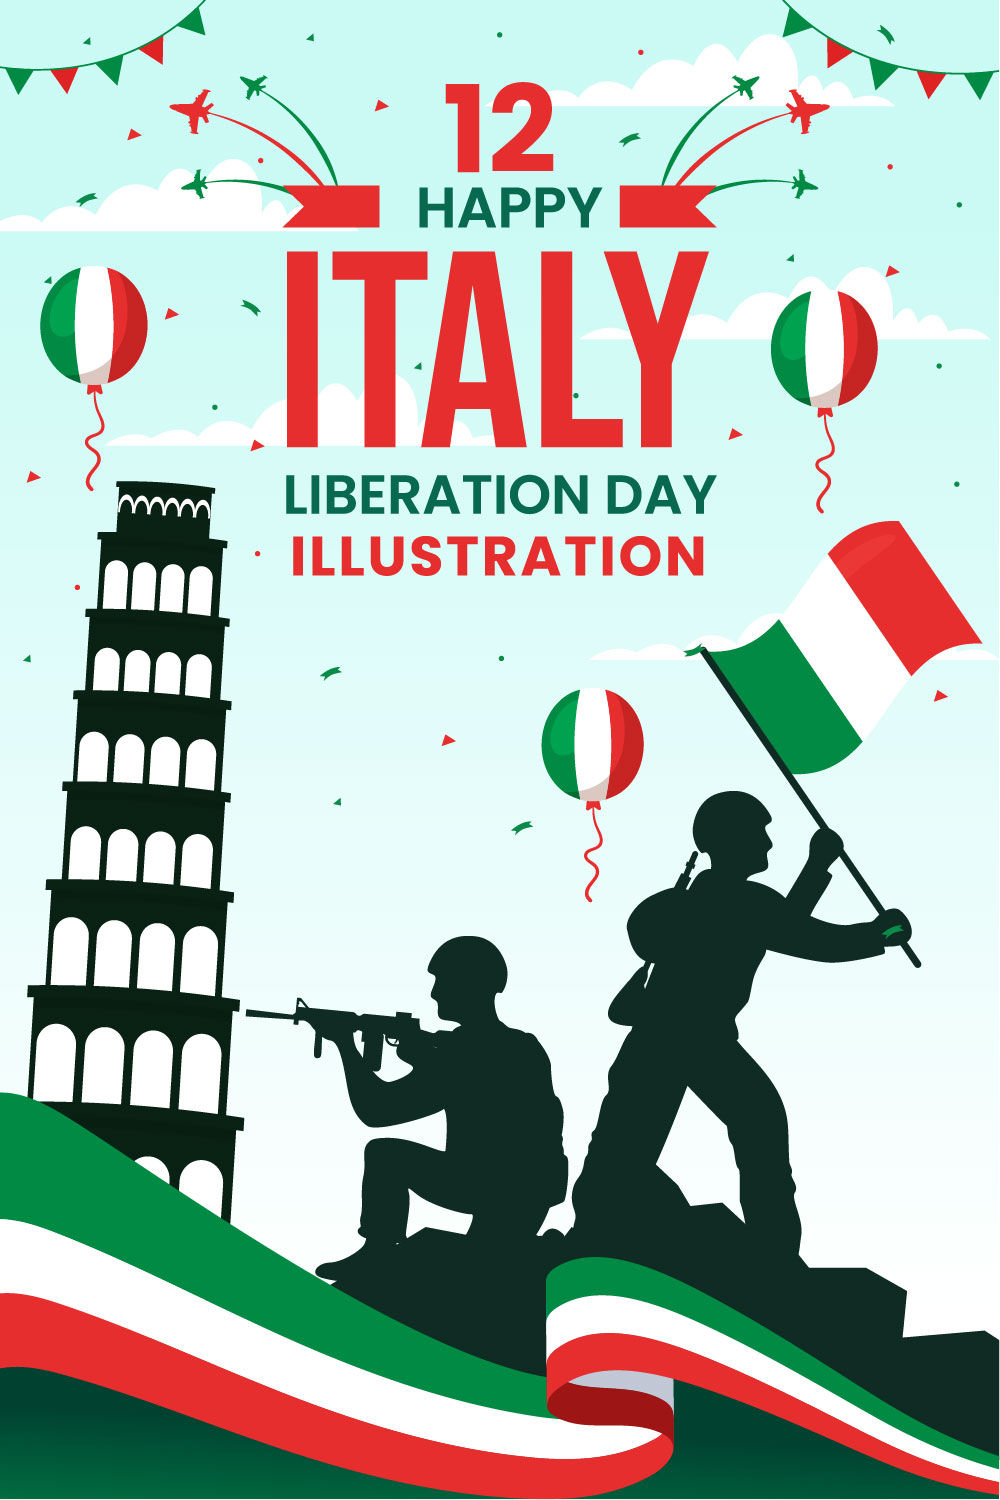 12 Happy Italy Liberation Day Illustration pinterest preview image.